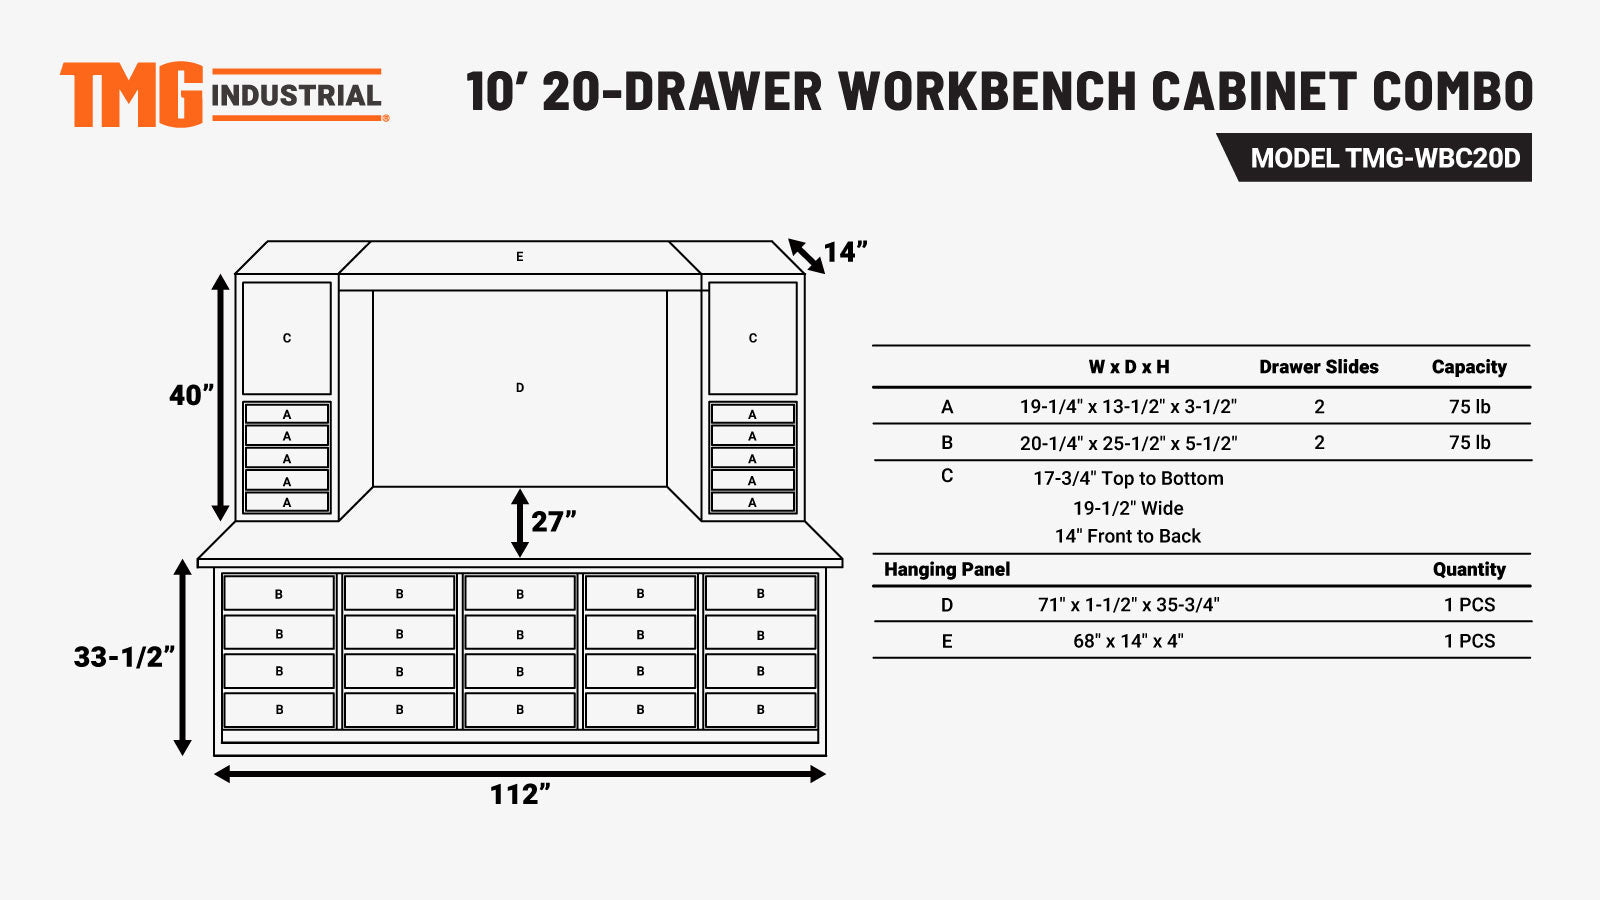 TMG-WBC20D 10' 20-Drawer Workbench Cabinet Combo with Stainless Steel Drawer Panels-specifications-image